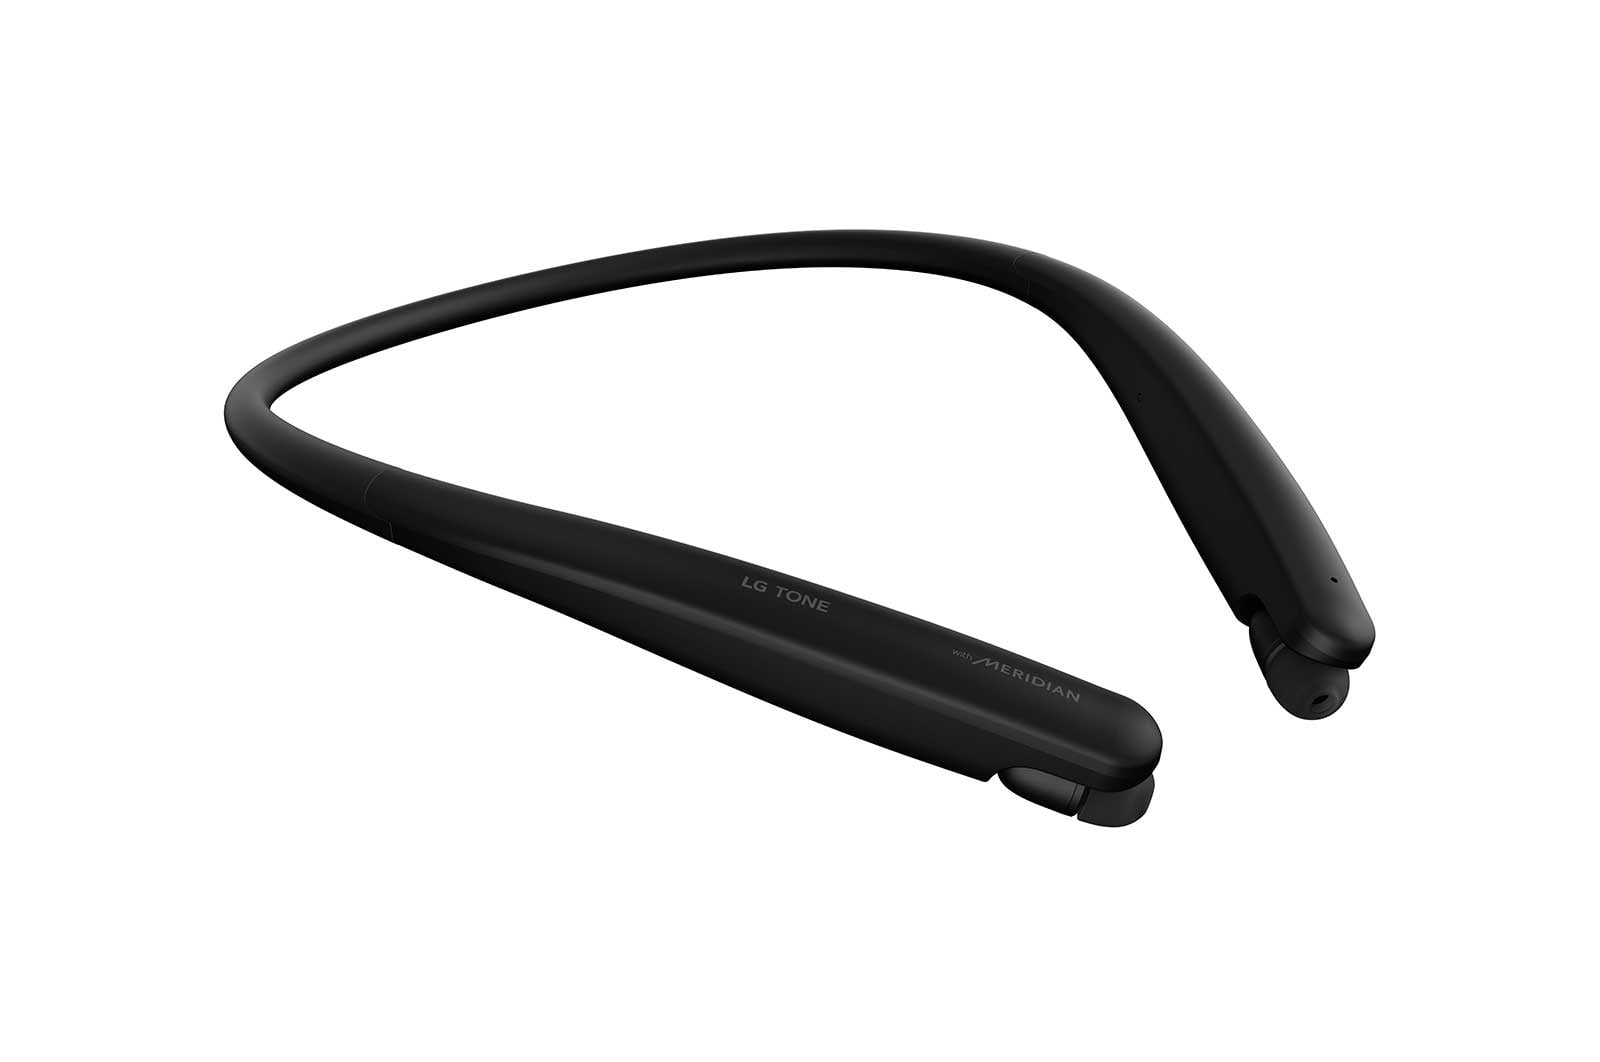 What LG Bluetooth Headset Has Noise Cancellation